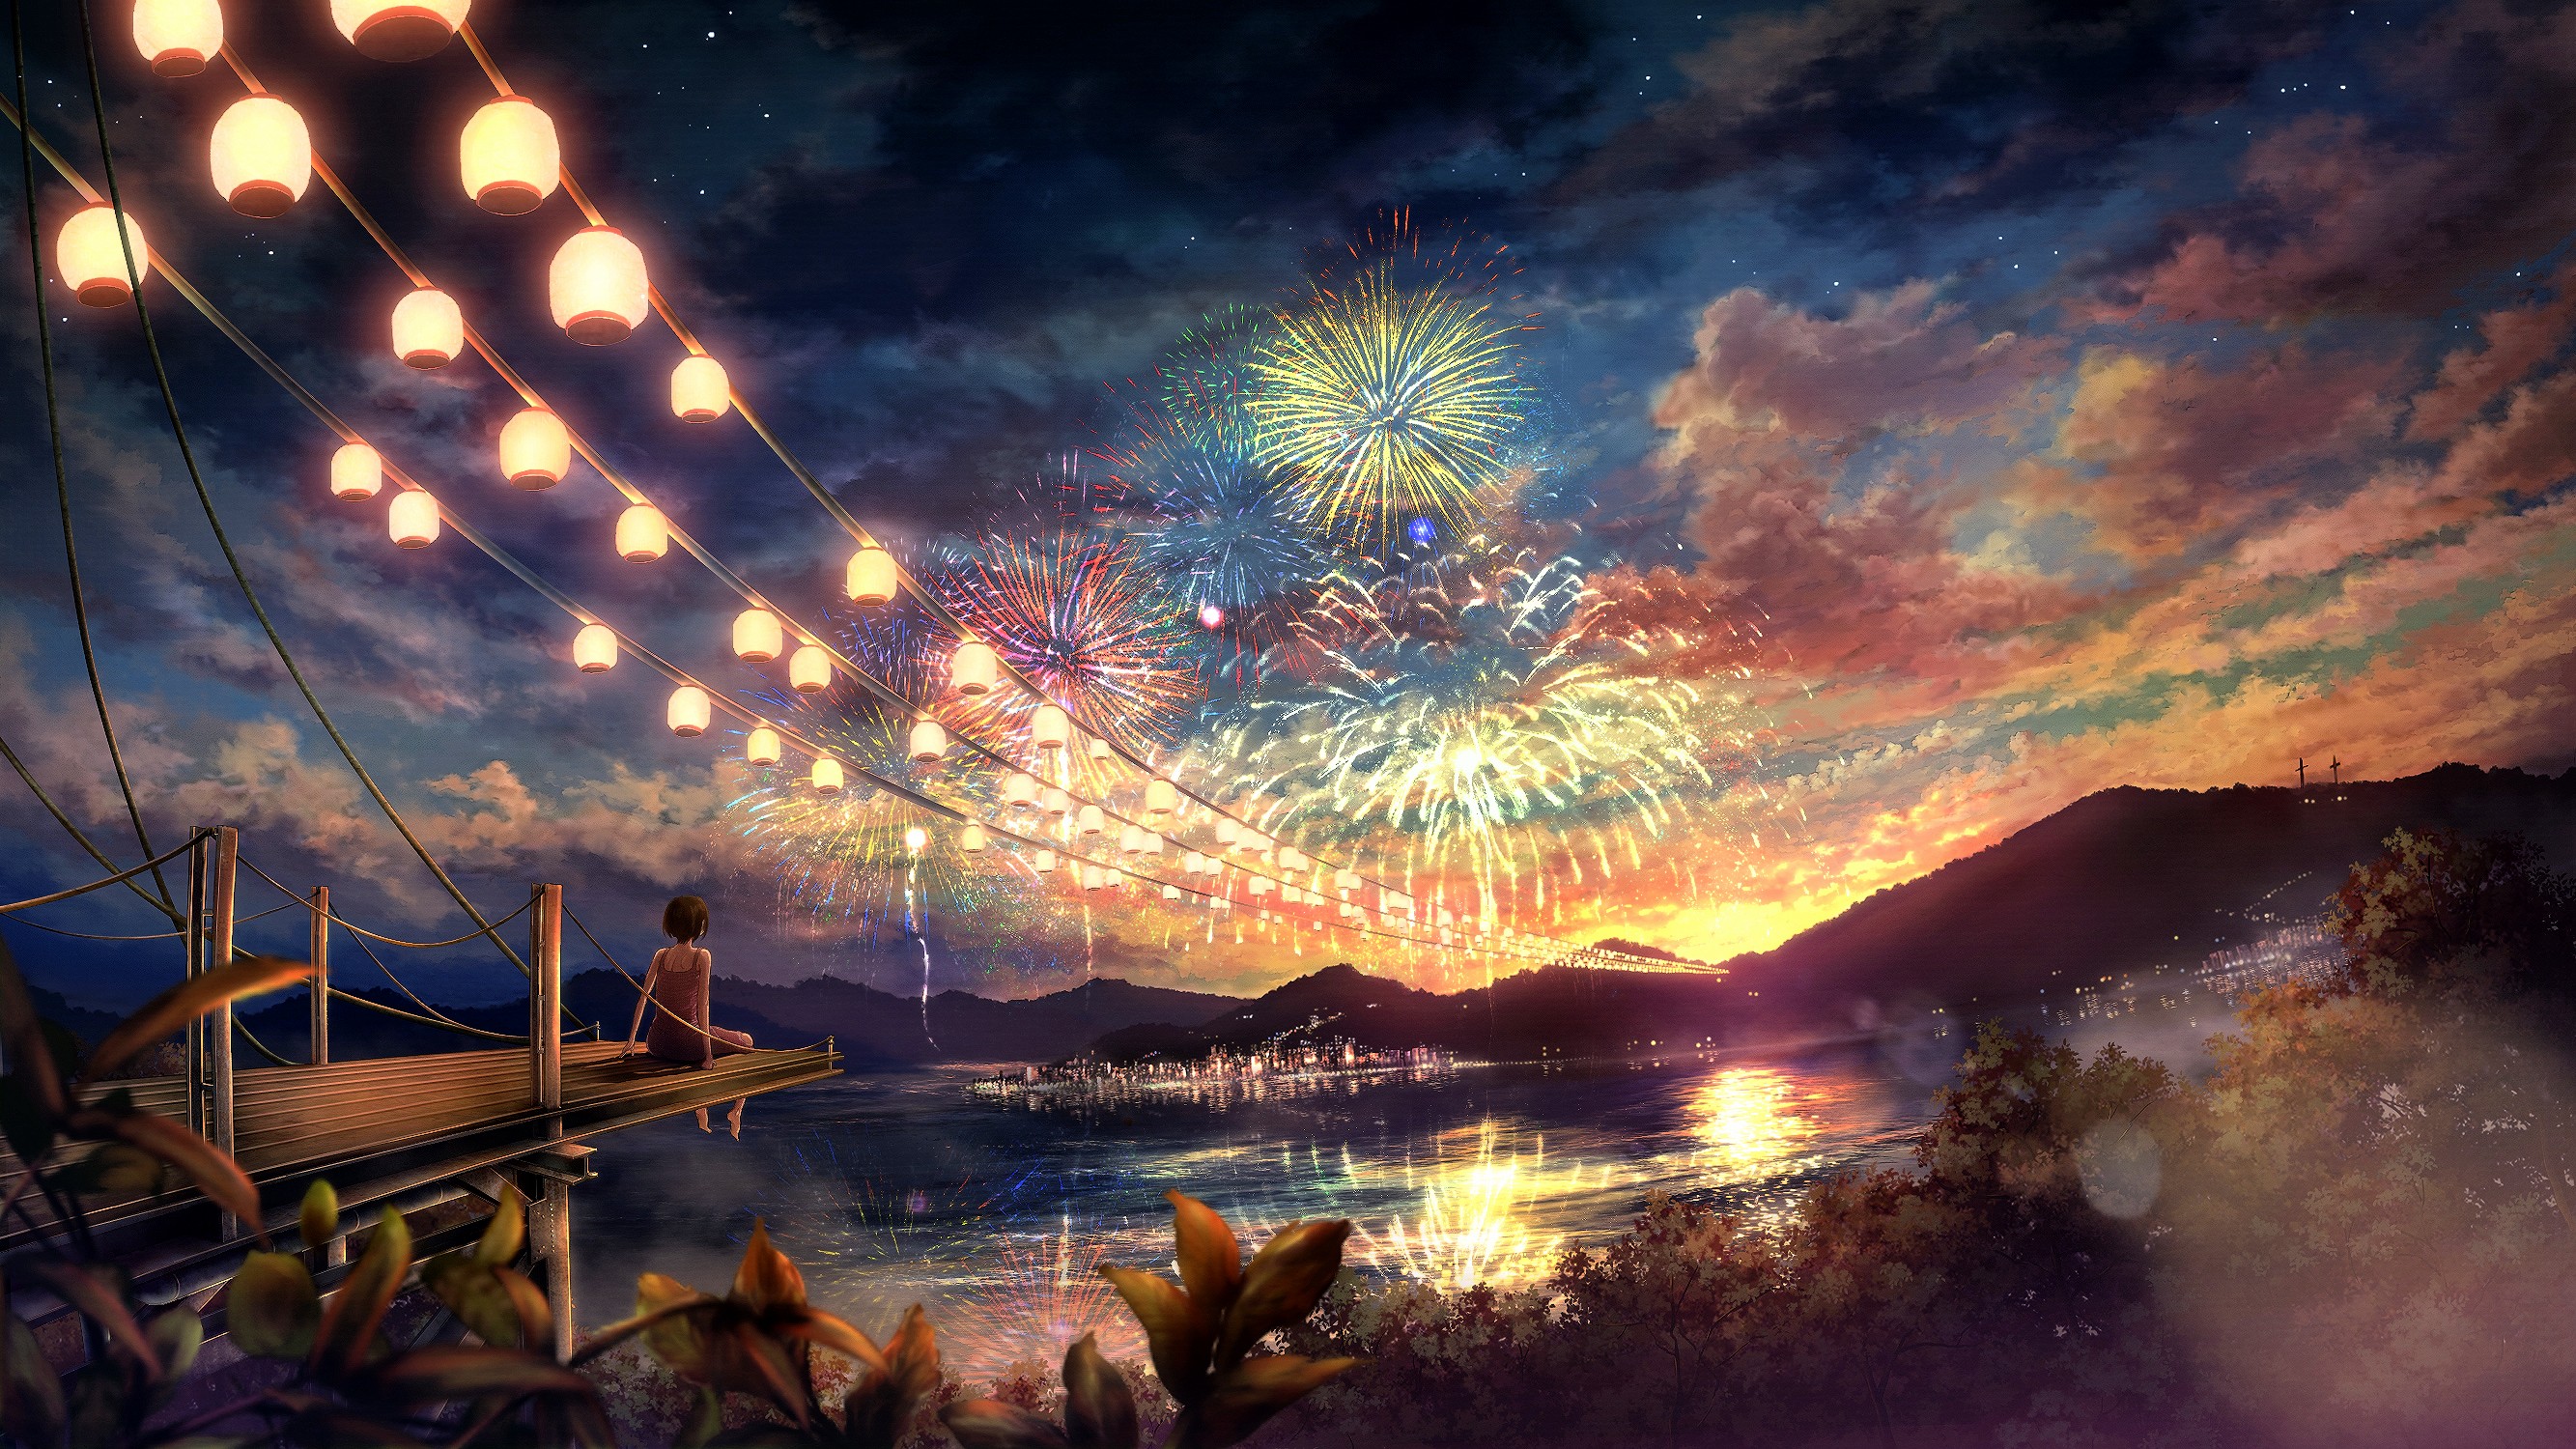 clouds, Landscapes, Trees, Fireworks, Scenic, Anime, Anime, Girls, Cities, Chinese, Lantern Wallpaper